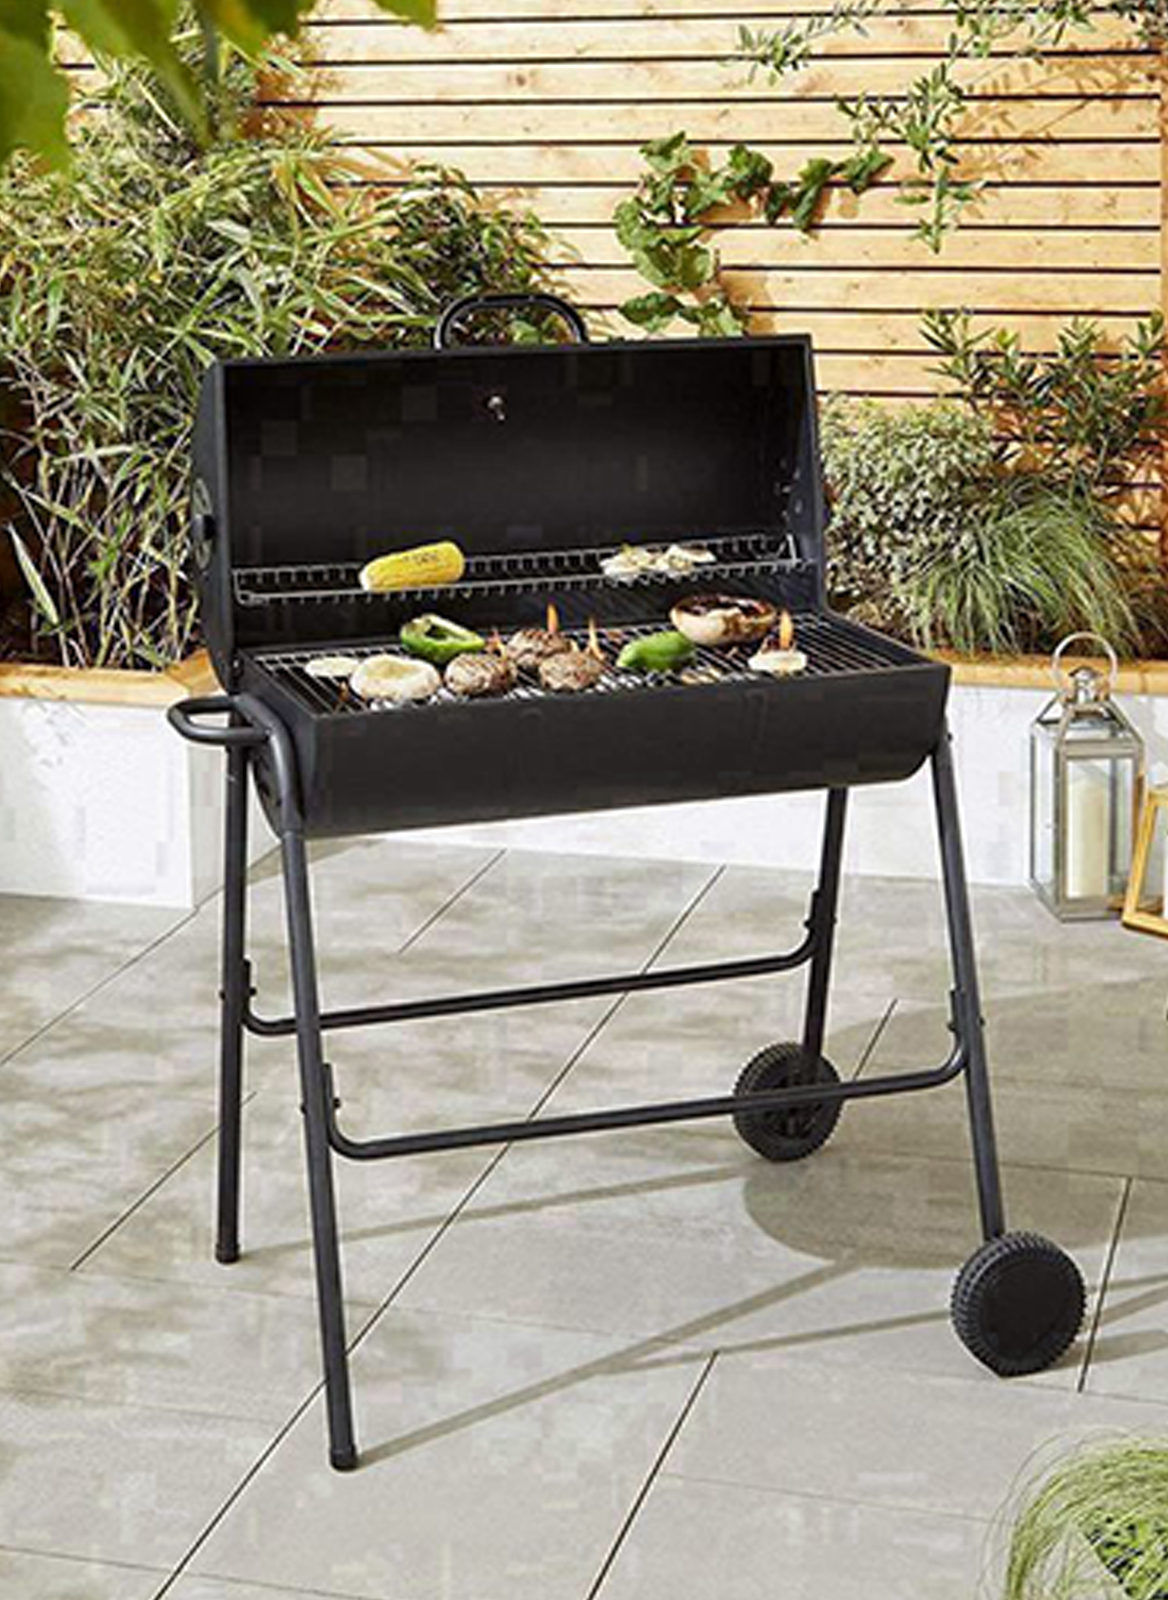 Portable American-Style Barbecue Grill with 2 Universal Wheels, Suitable for Outdoor Use, Courtyards, and Camping